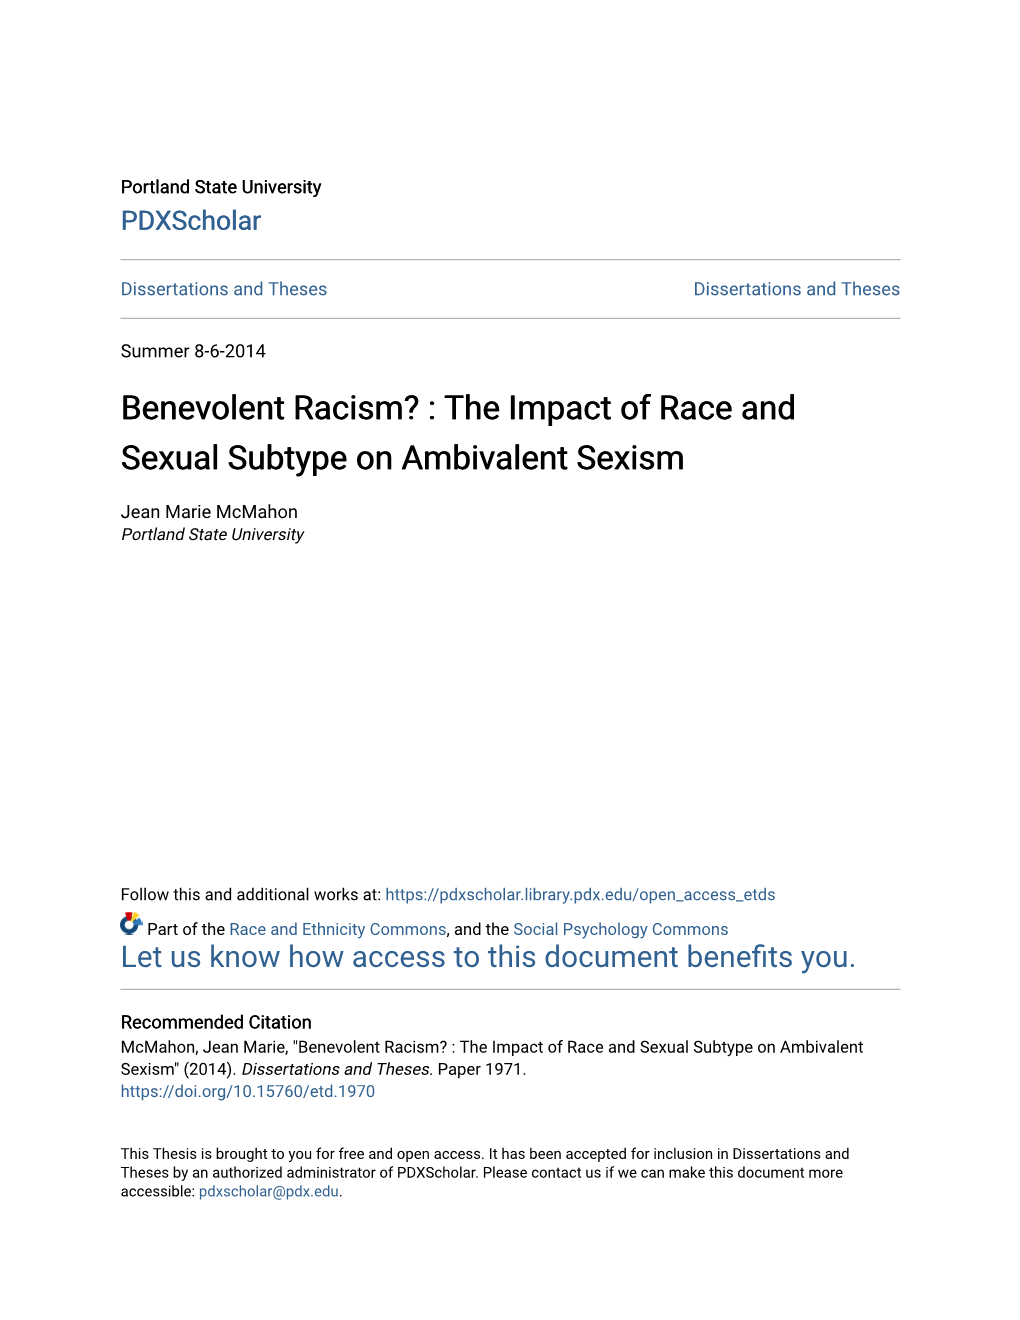 Benevolent Racism? : the Impact of Race and Sexual Subtype on Ambivalent Sexism